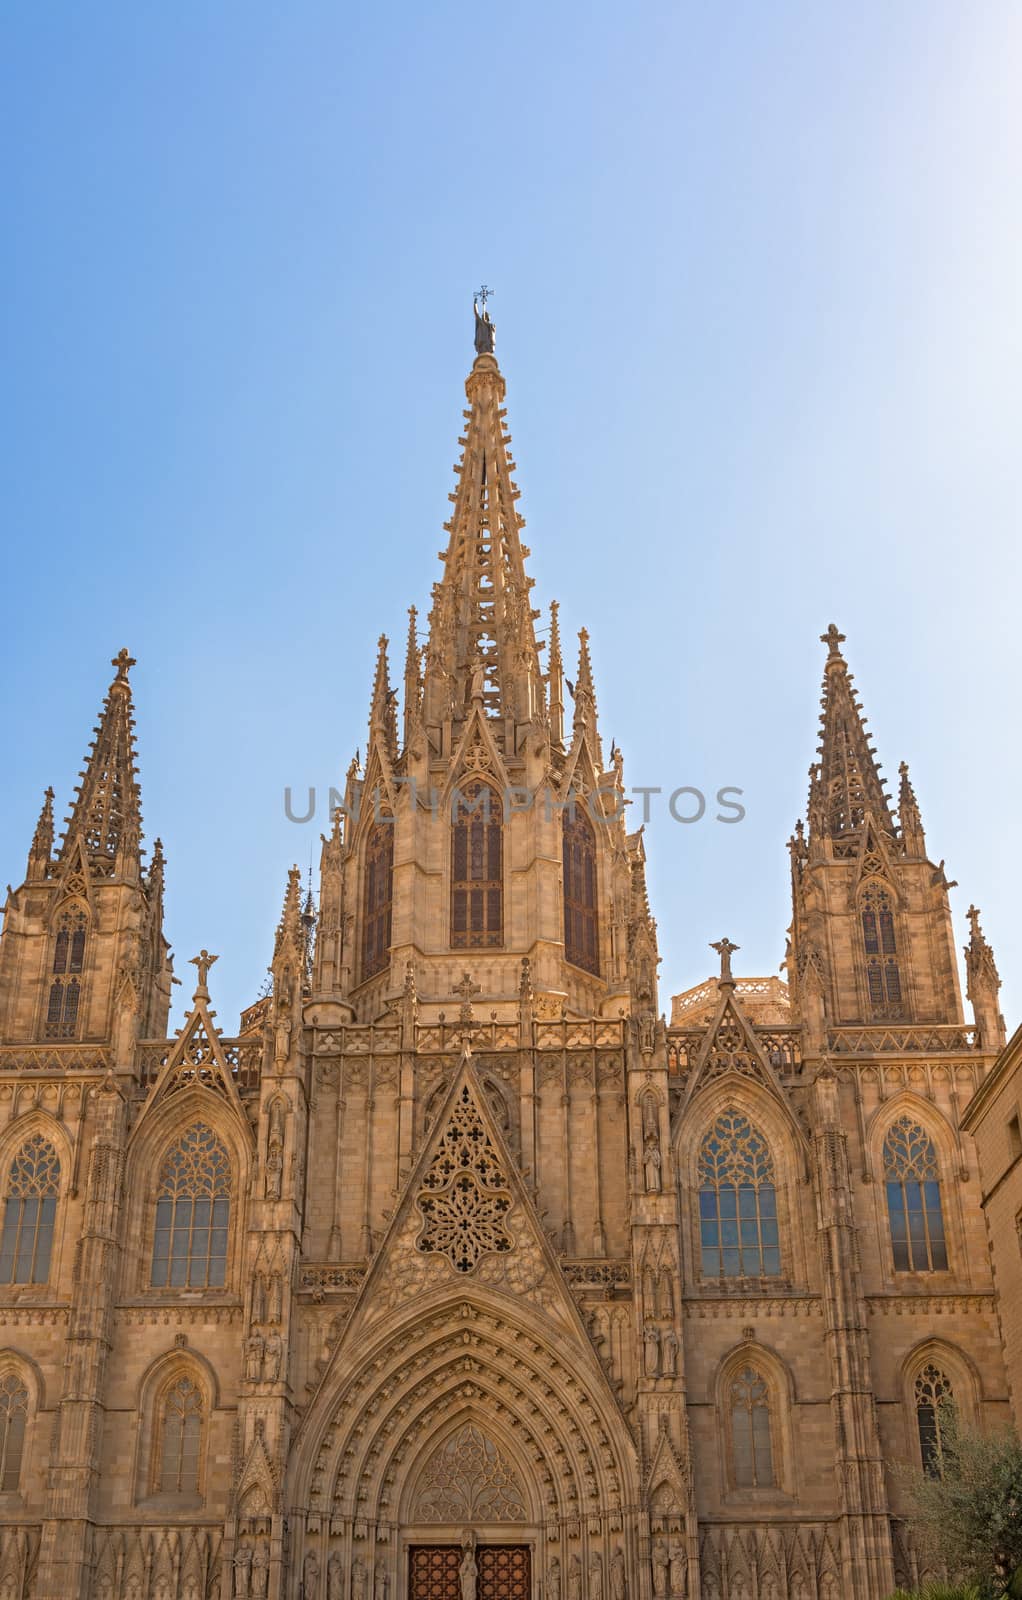 Barcelona cathedral facade details, Spain. The cathedral is in the heart of Barri Gotic (Gothic Quarter) of Barcelona 